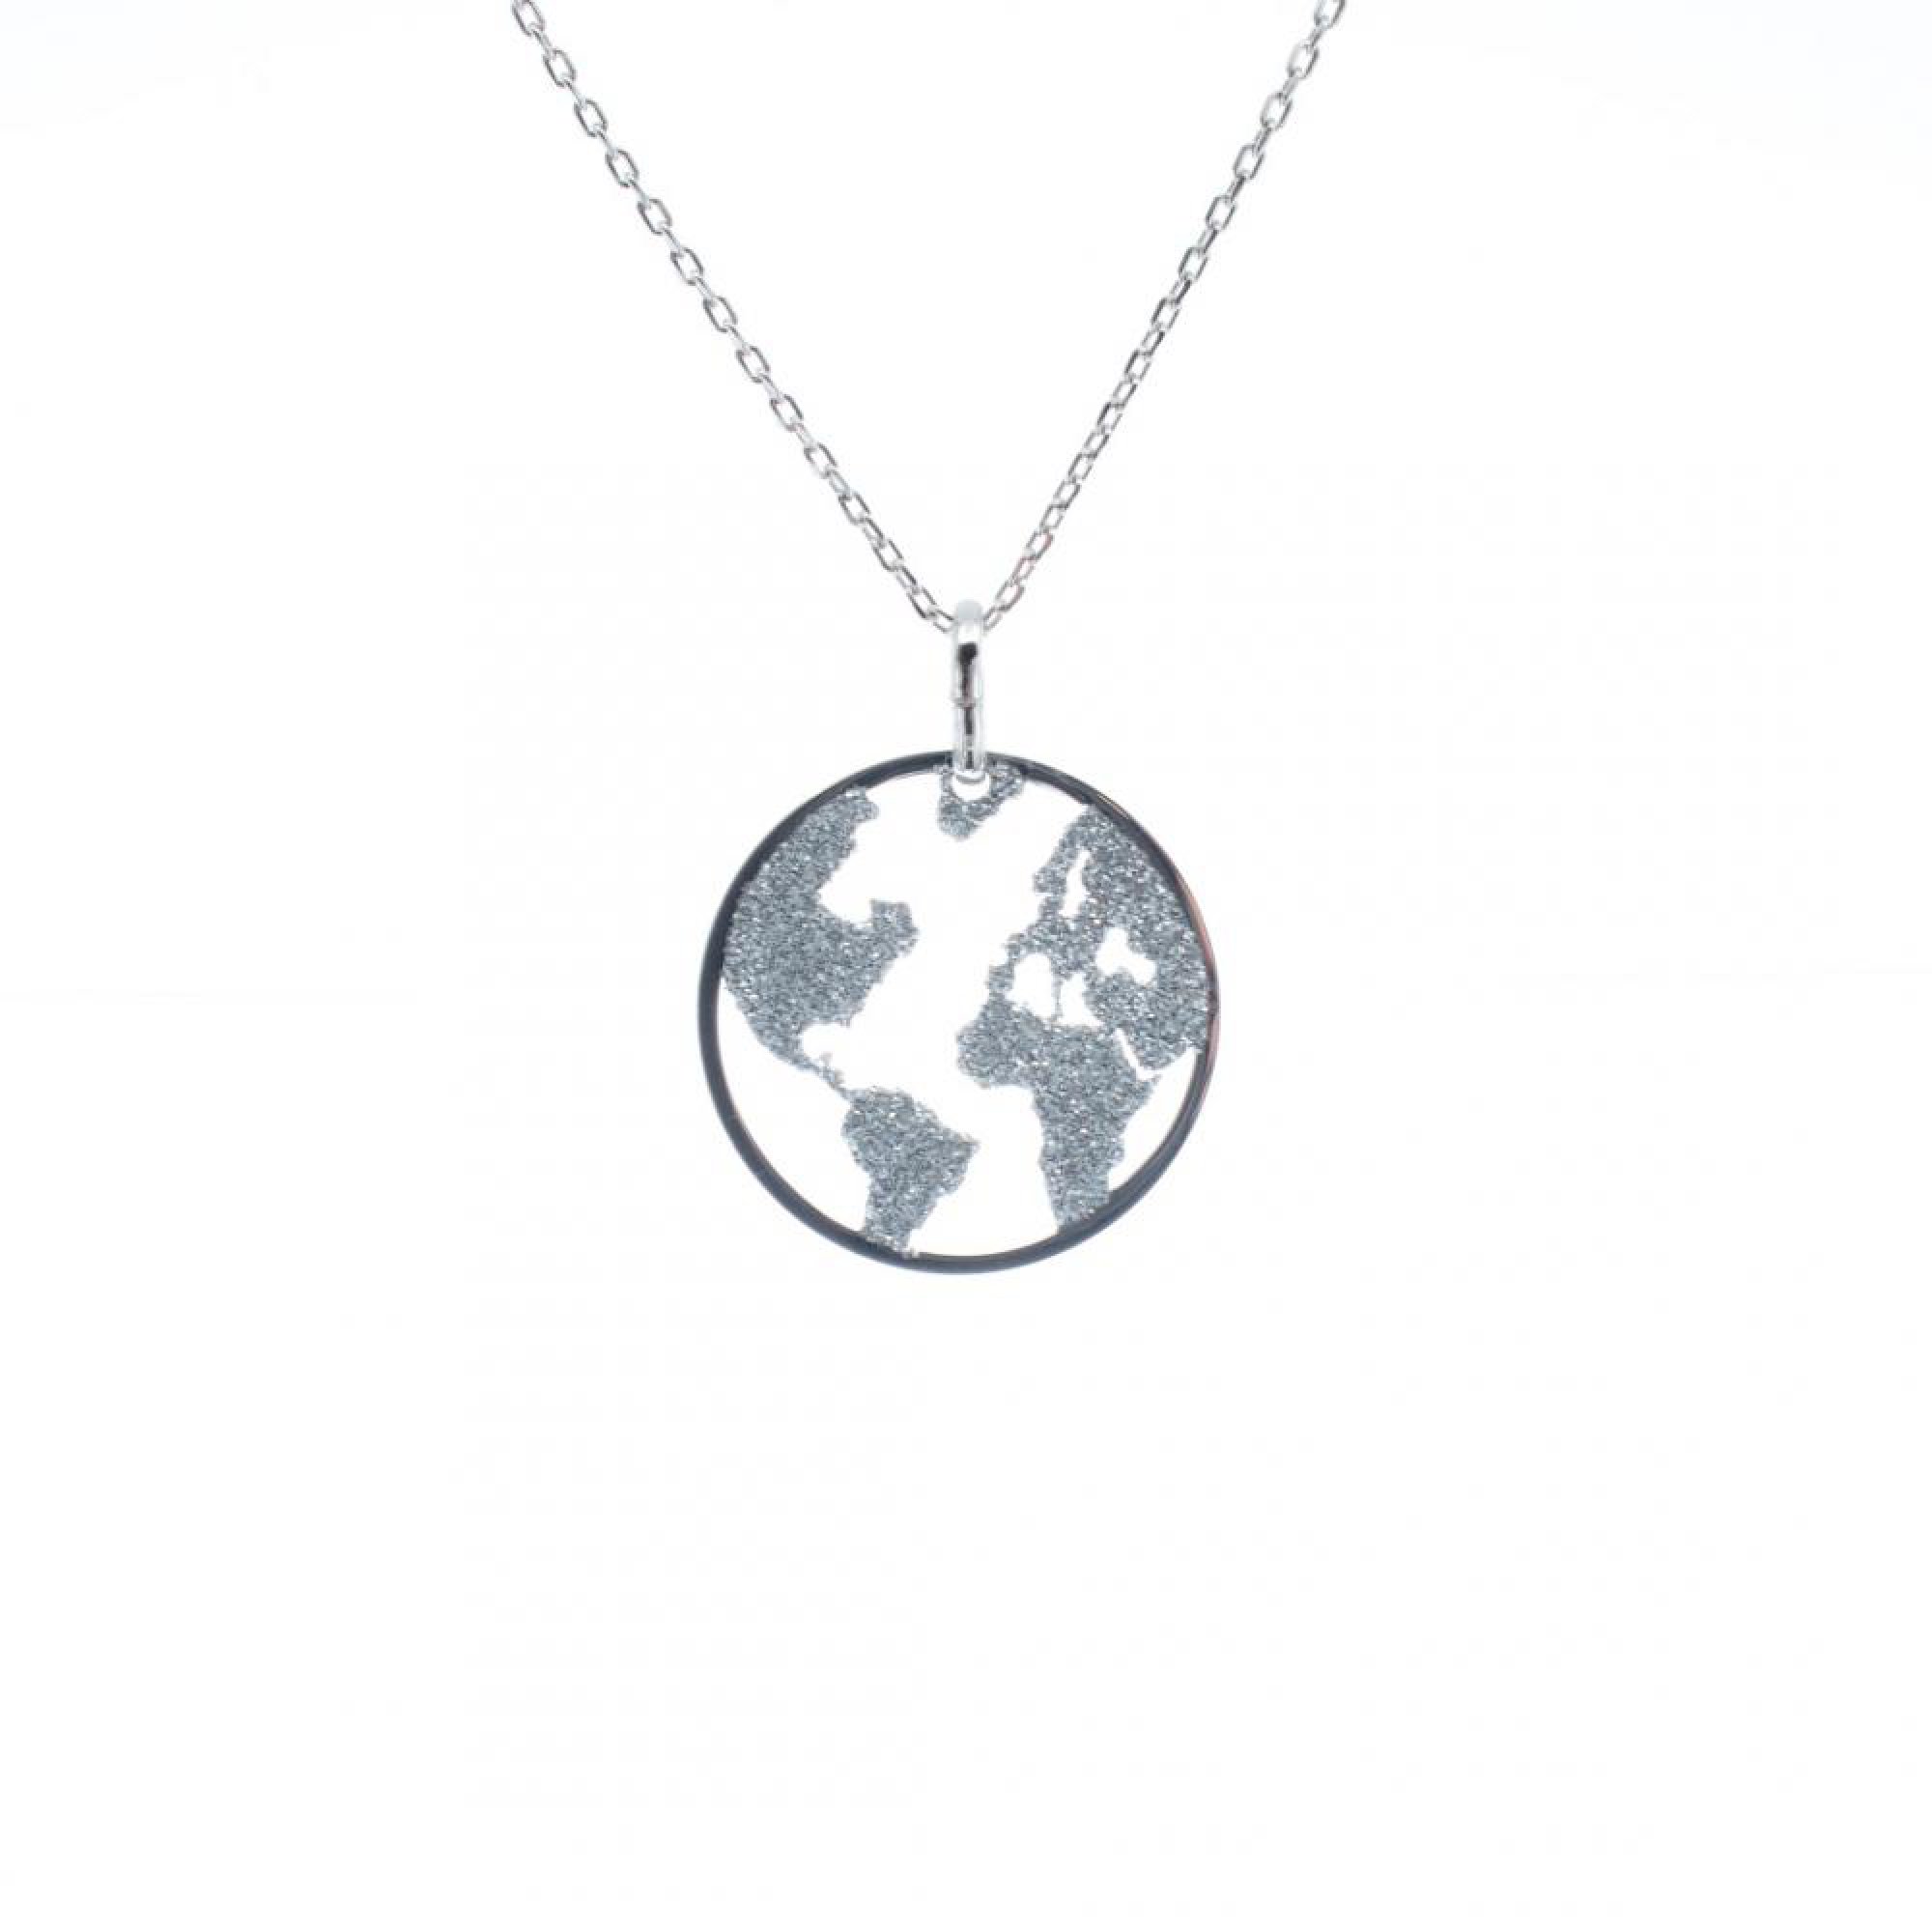 Silver globe necklace with glitter 